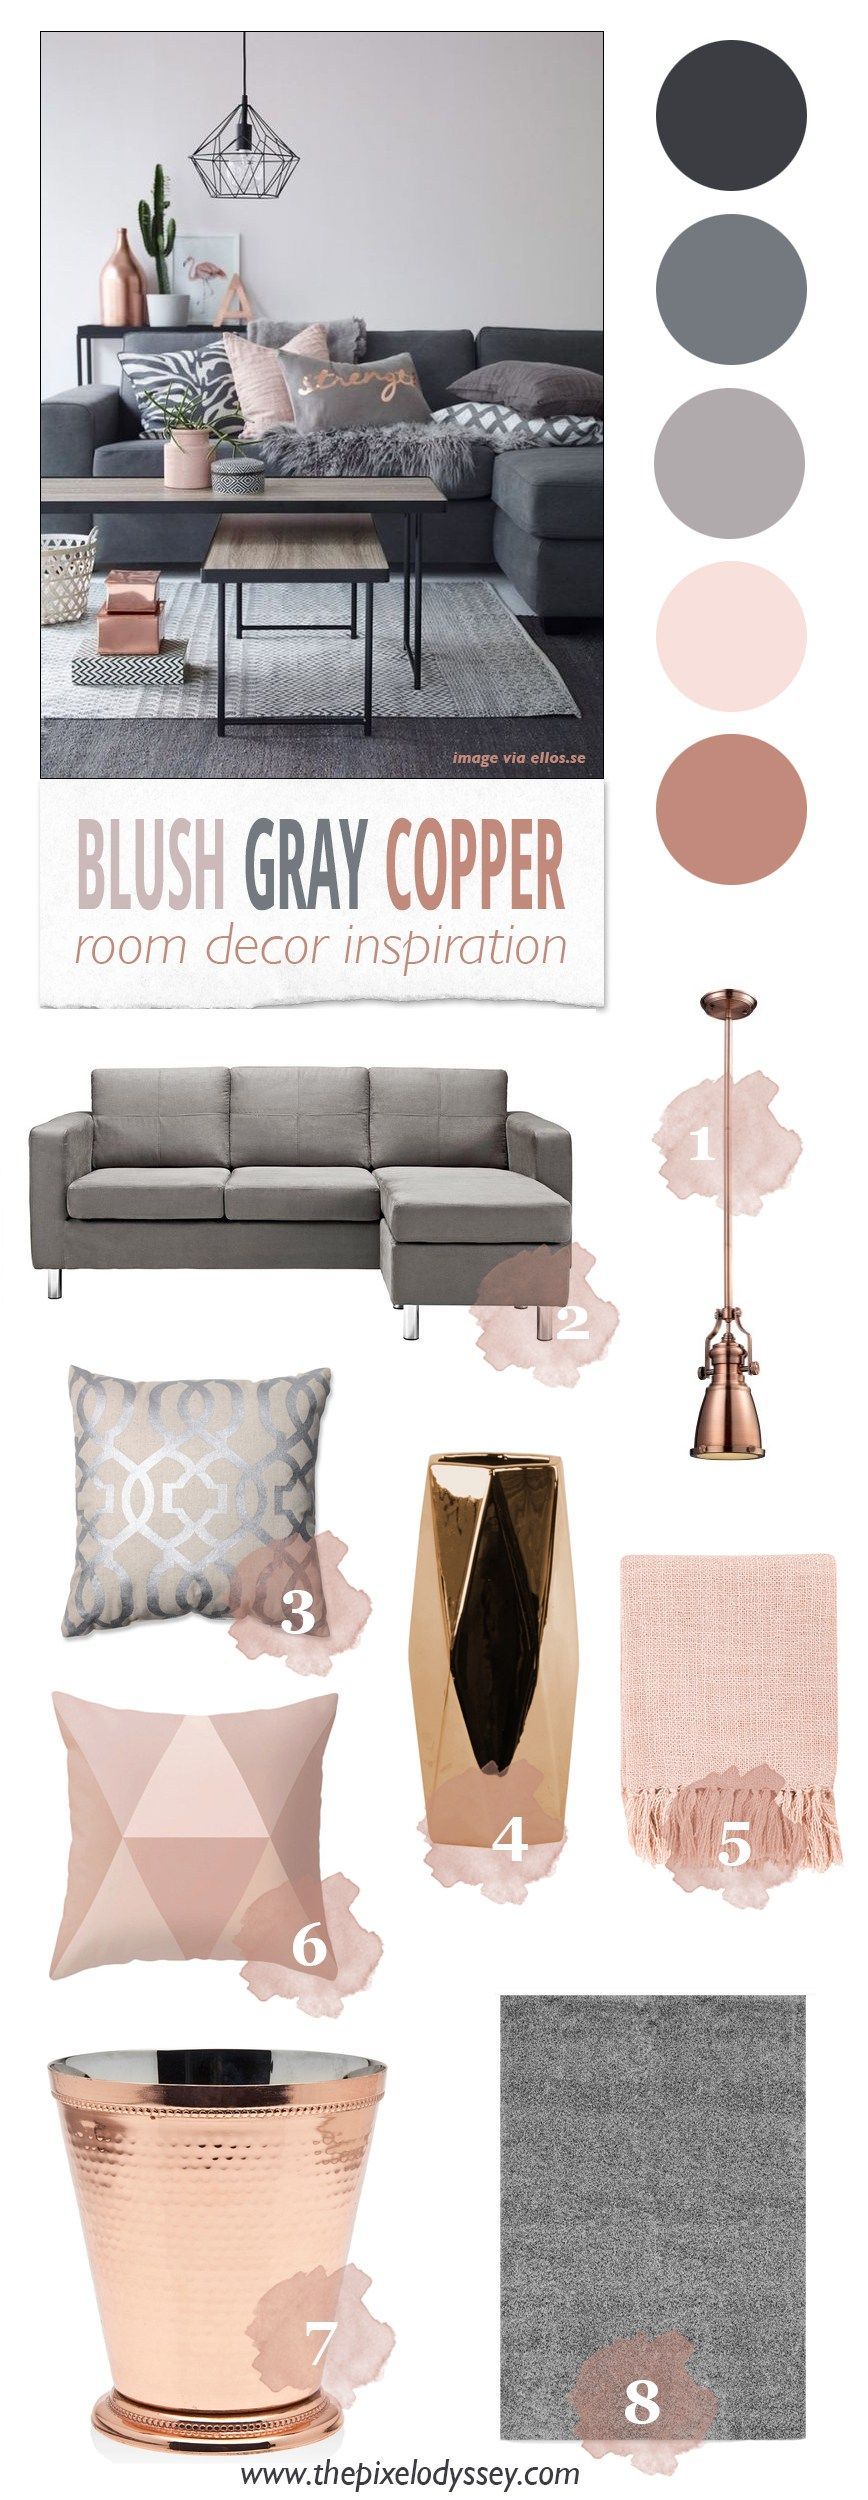 Blush Gray Copper Room Decor Inspiration – The Pixel Odyssey // visit our sister sites http://www.openimagemedia.com for more